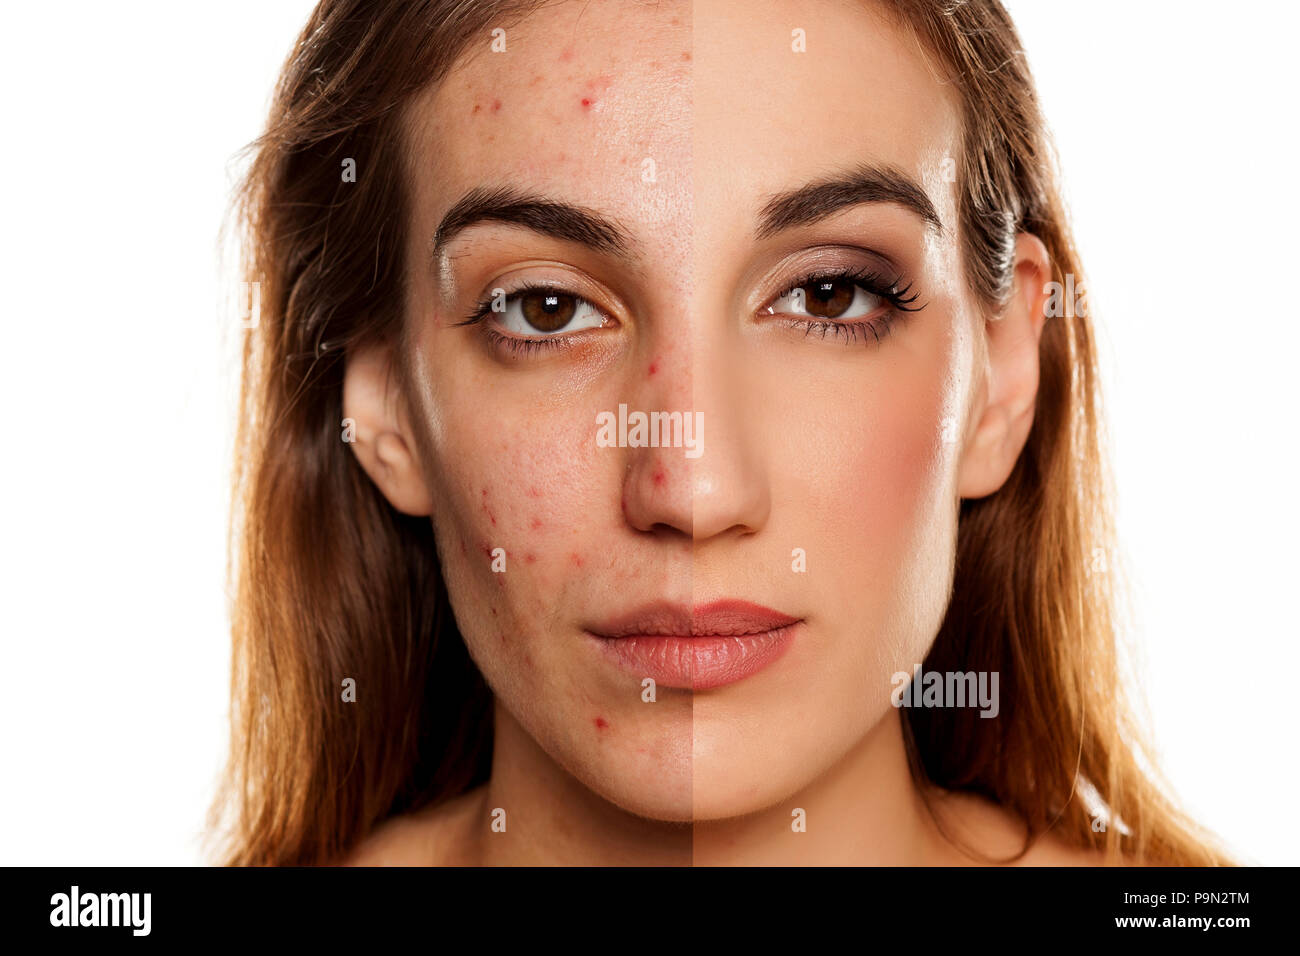 comparition portrait of same woman before and after cosmetic treatment amd makeup on white background Stock Photo